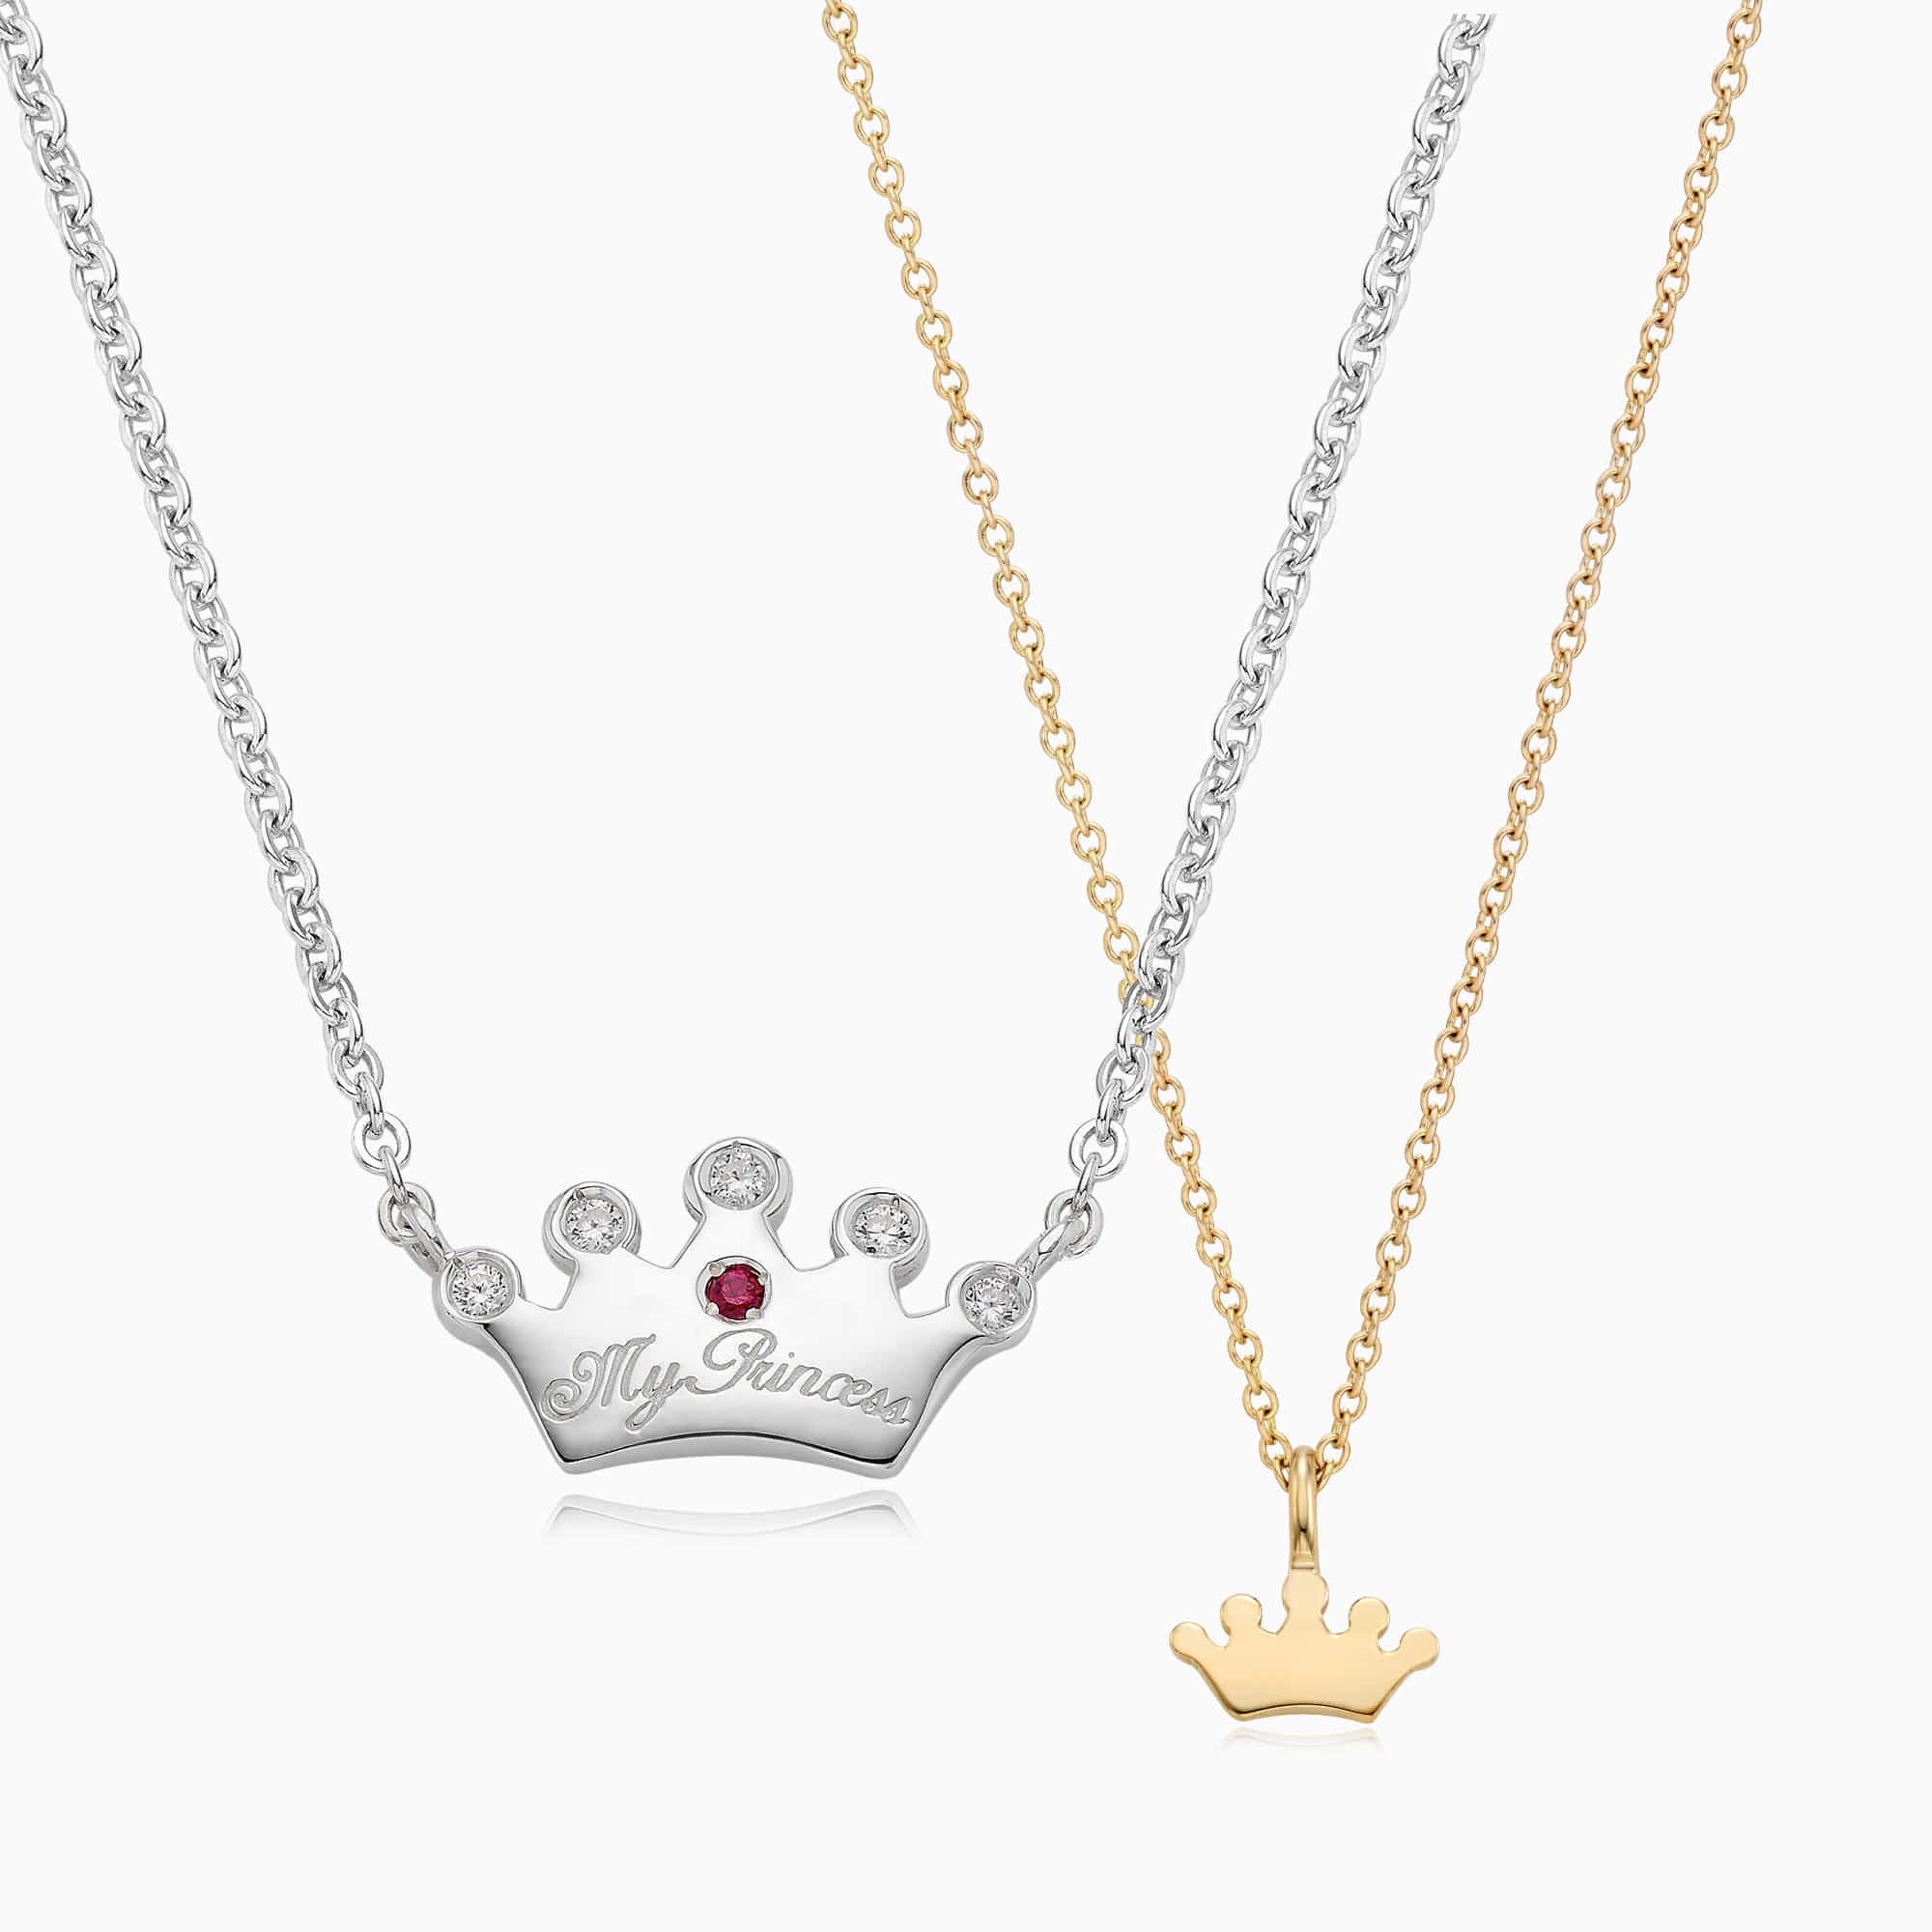 [With My Child] Silver/14K/18K Crown Necklace